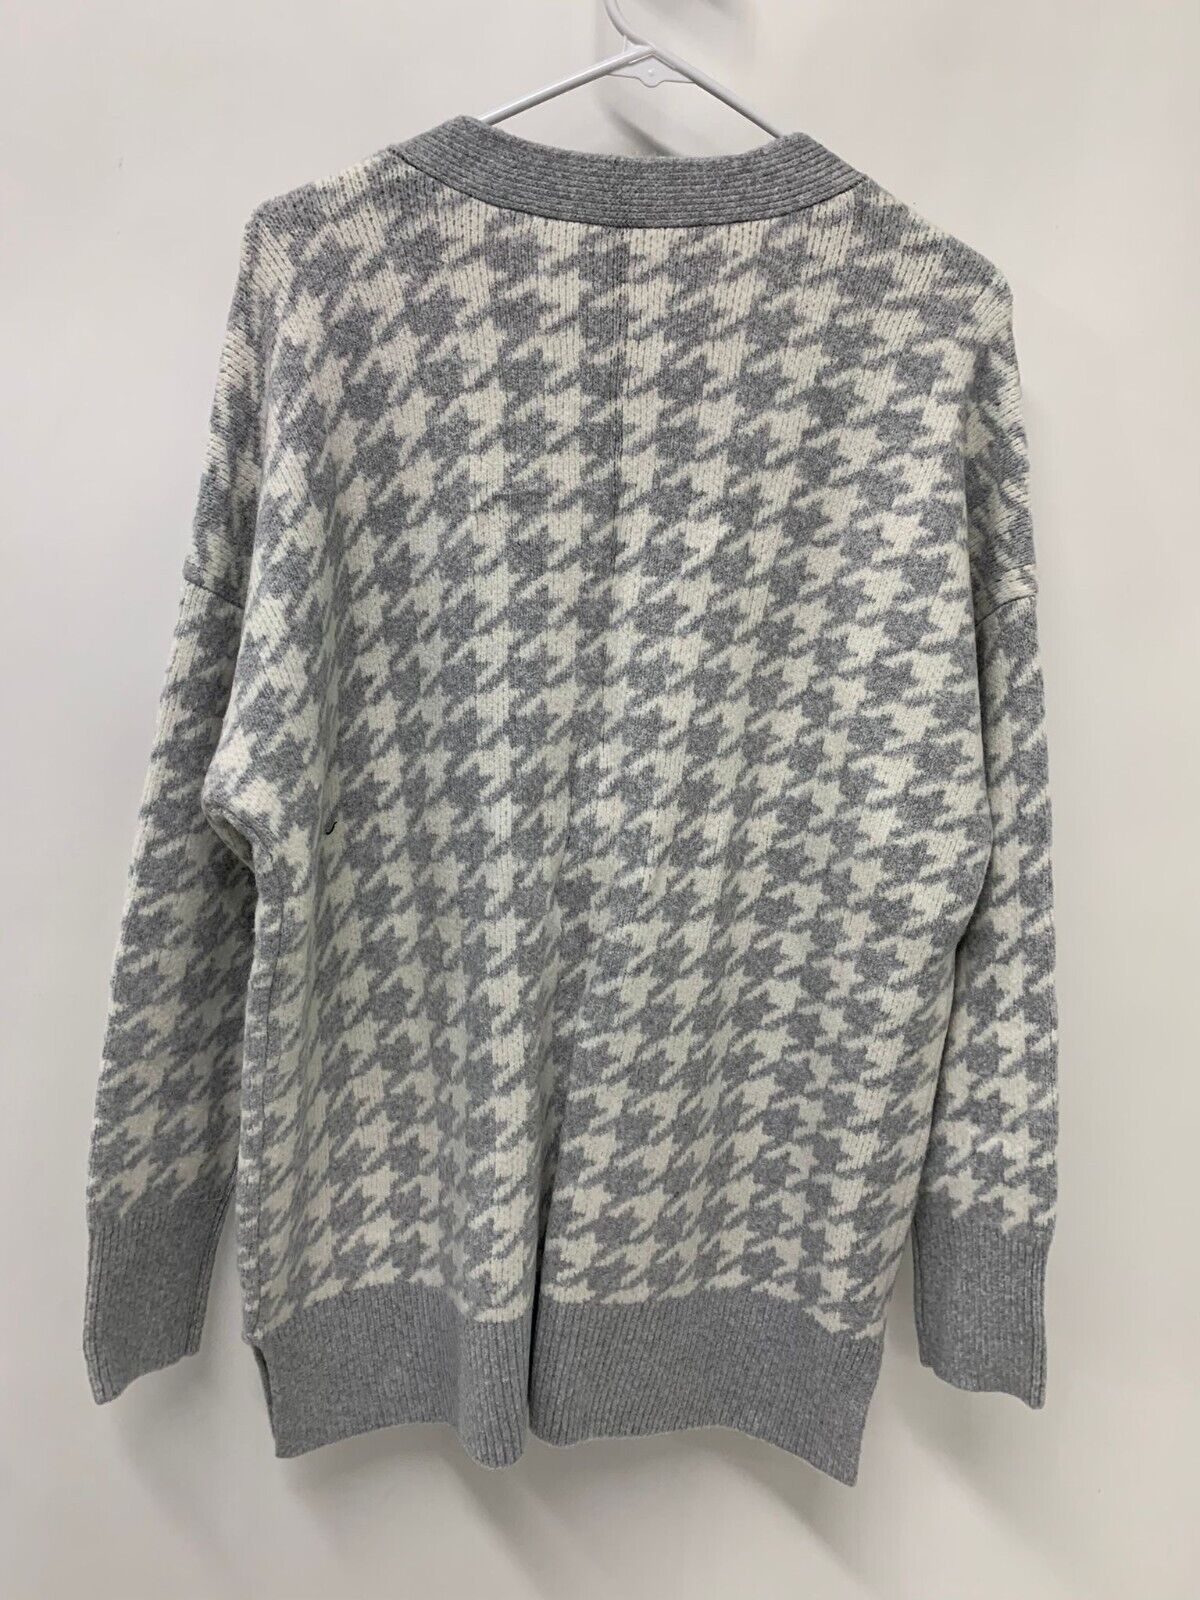 Abercrombie & Fitch Womens M Cream Gray Houndstooth Cardi Carigan Sweater